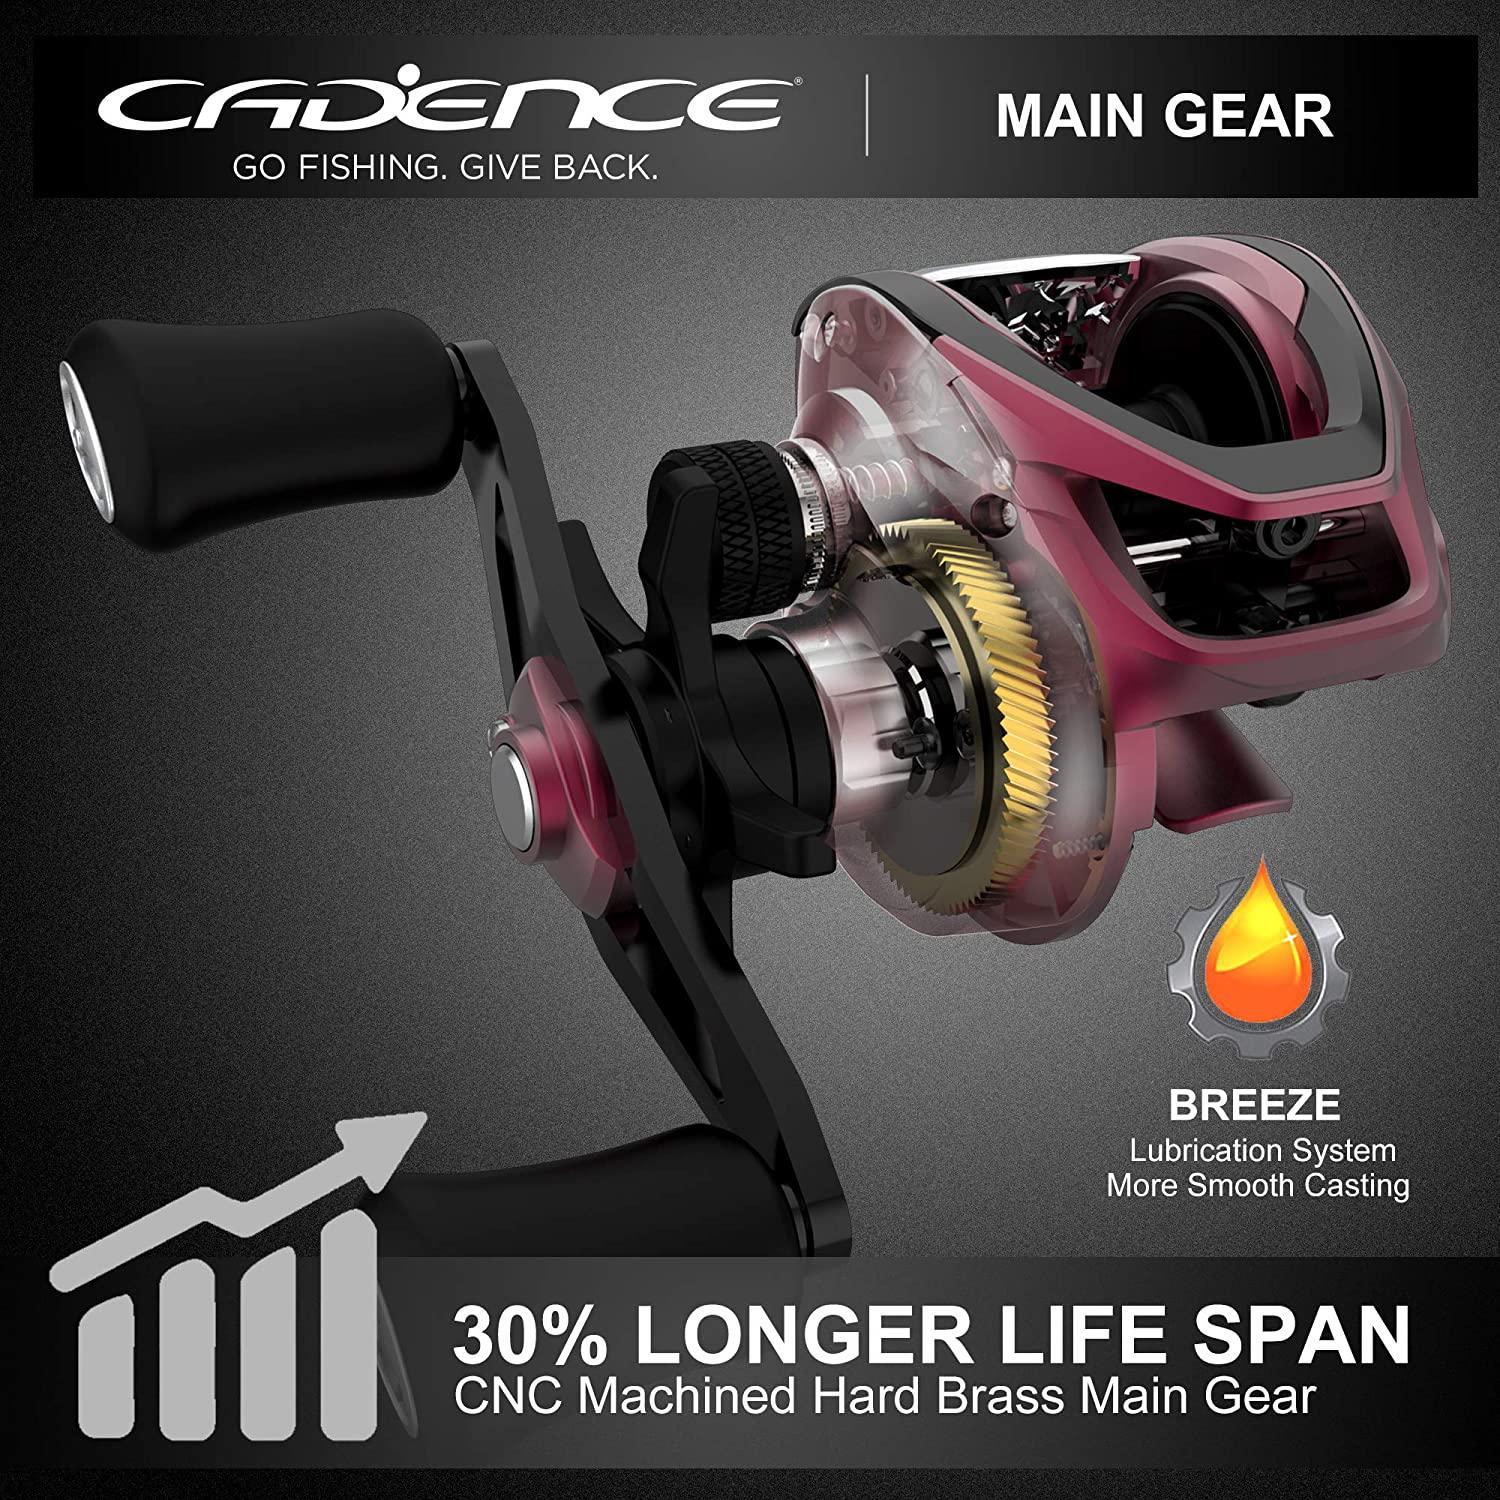 Cadence CB568 Baitcasting Reels Lightweight Graphite Frame Fishing Reels  with Corrosion Resistant Bearings Baitcaster Reels Carbon Fiber Drag Baitcast  Reels with 7.3:1 Gear Ratio Casting Cb5r Red Right 6.6:1